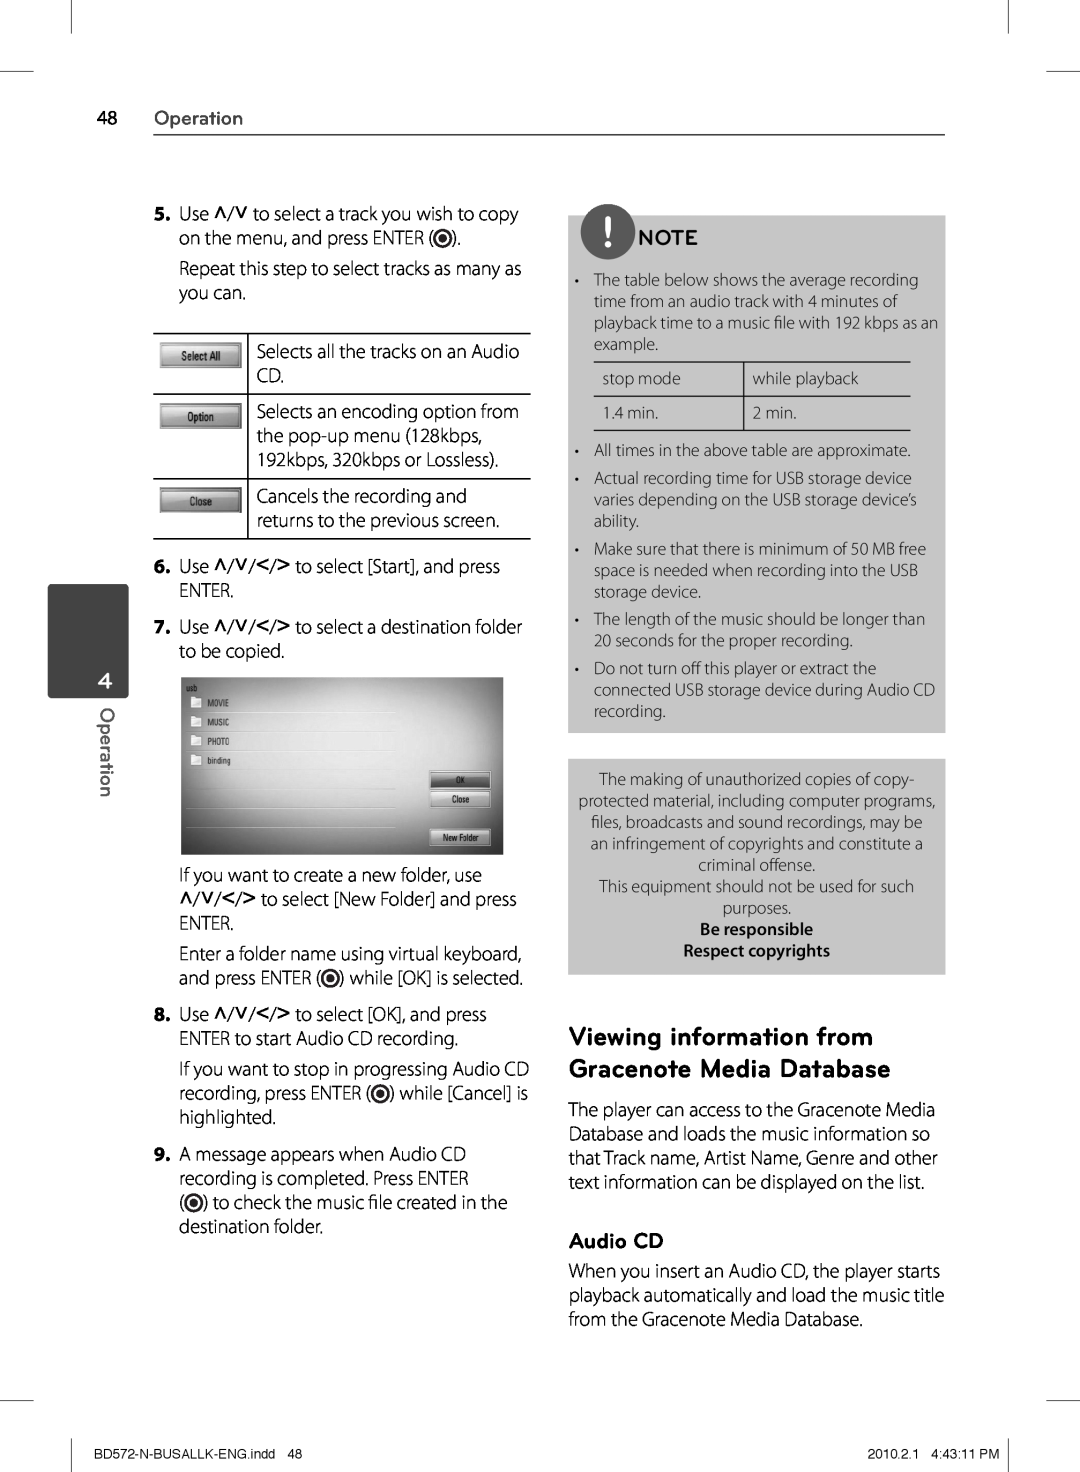 LG Electronics BD570 owner manual Viewing information from Gracenote Media Database, Audio CD, Operation 